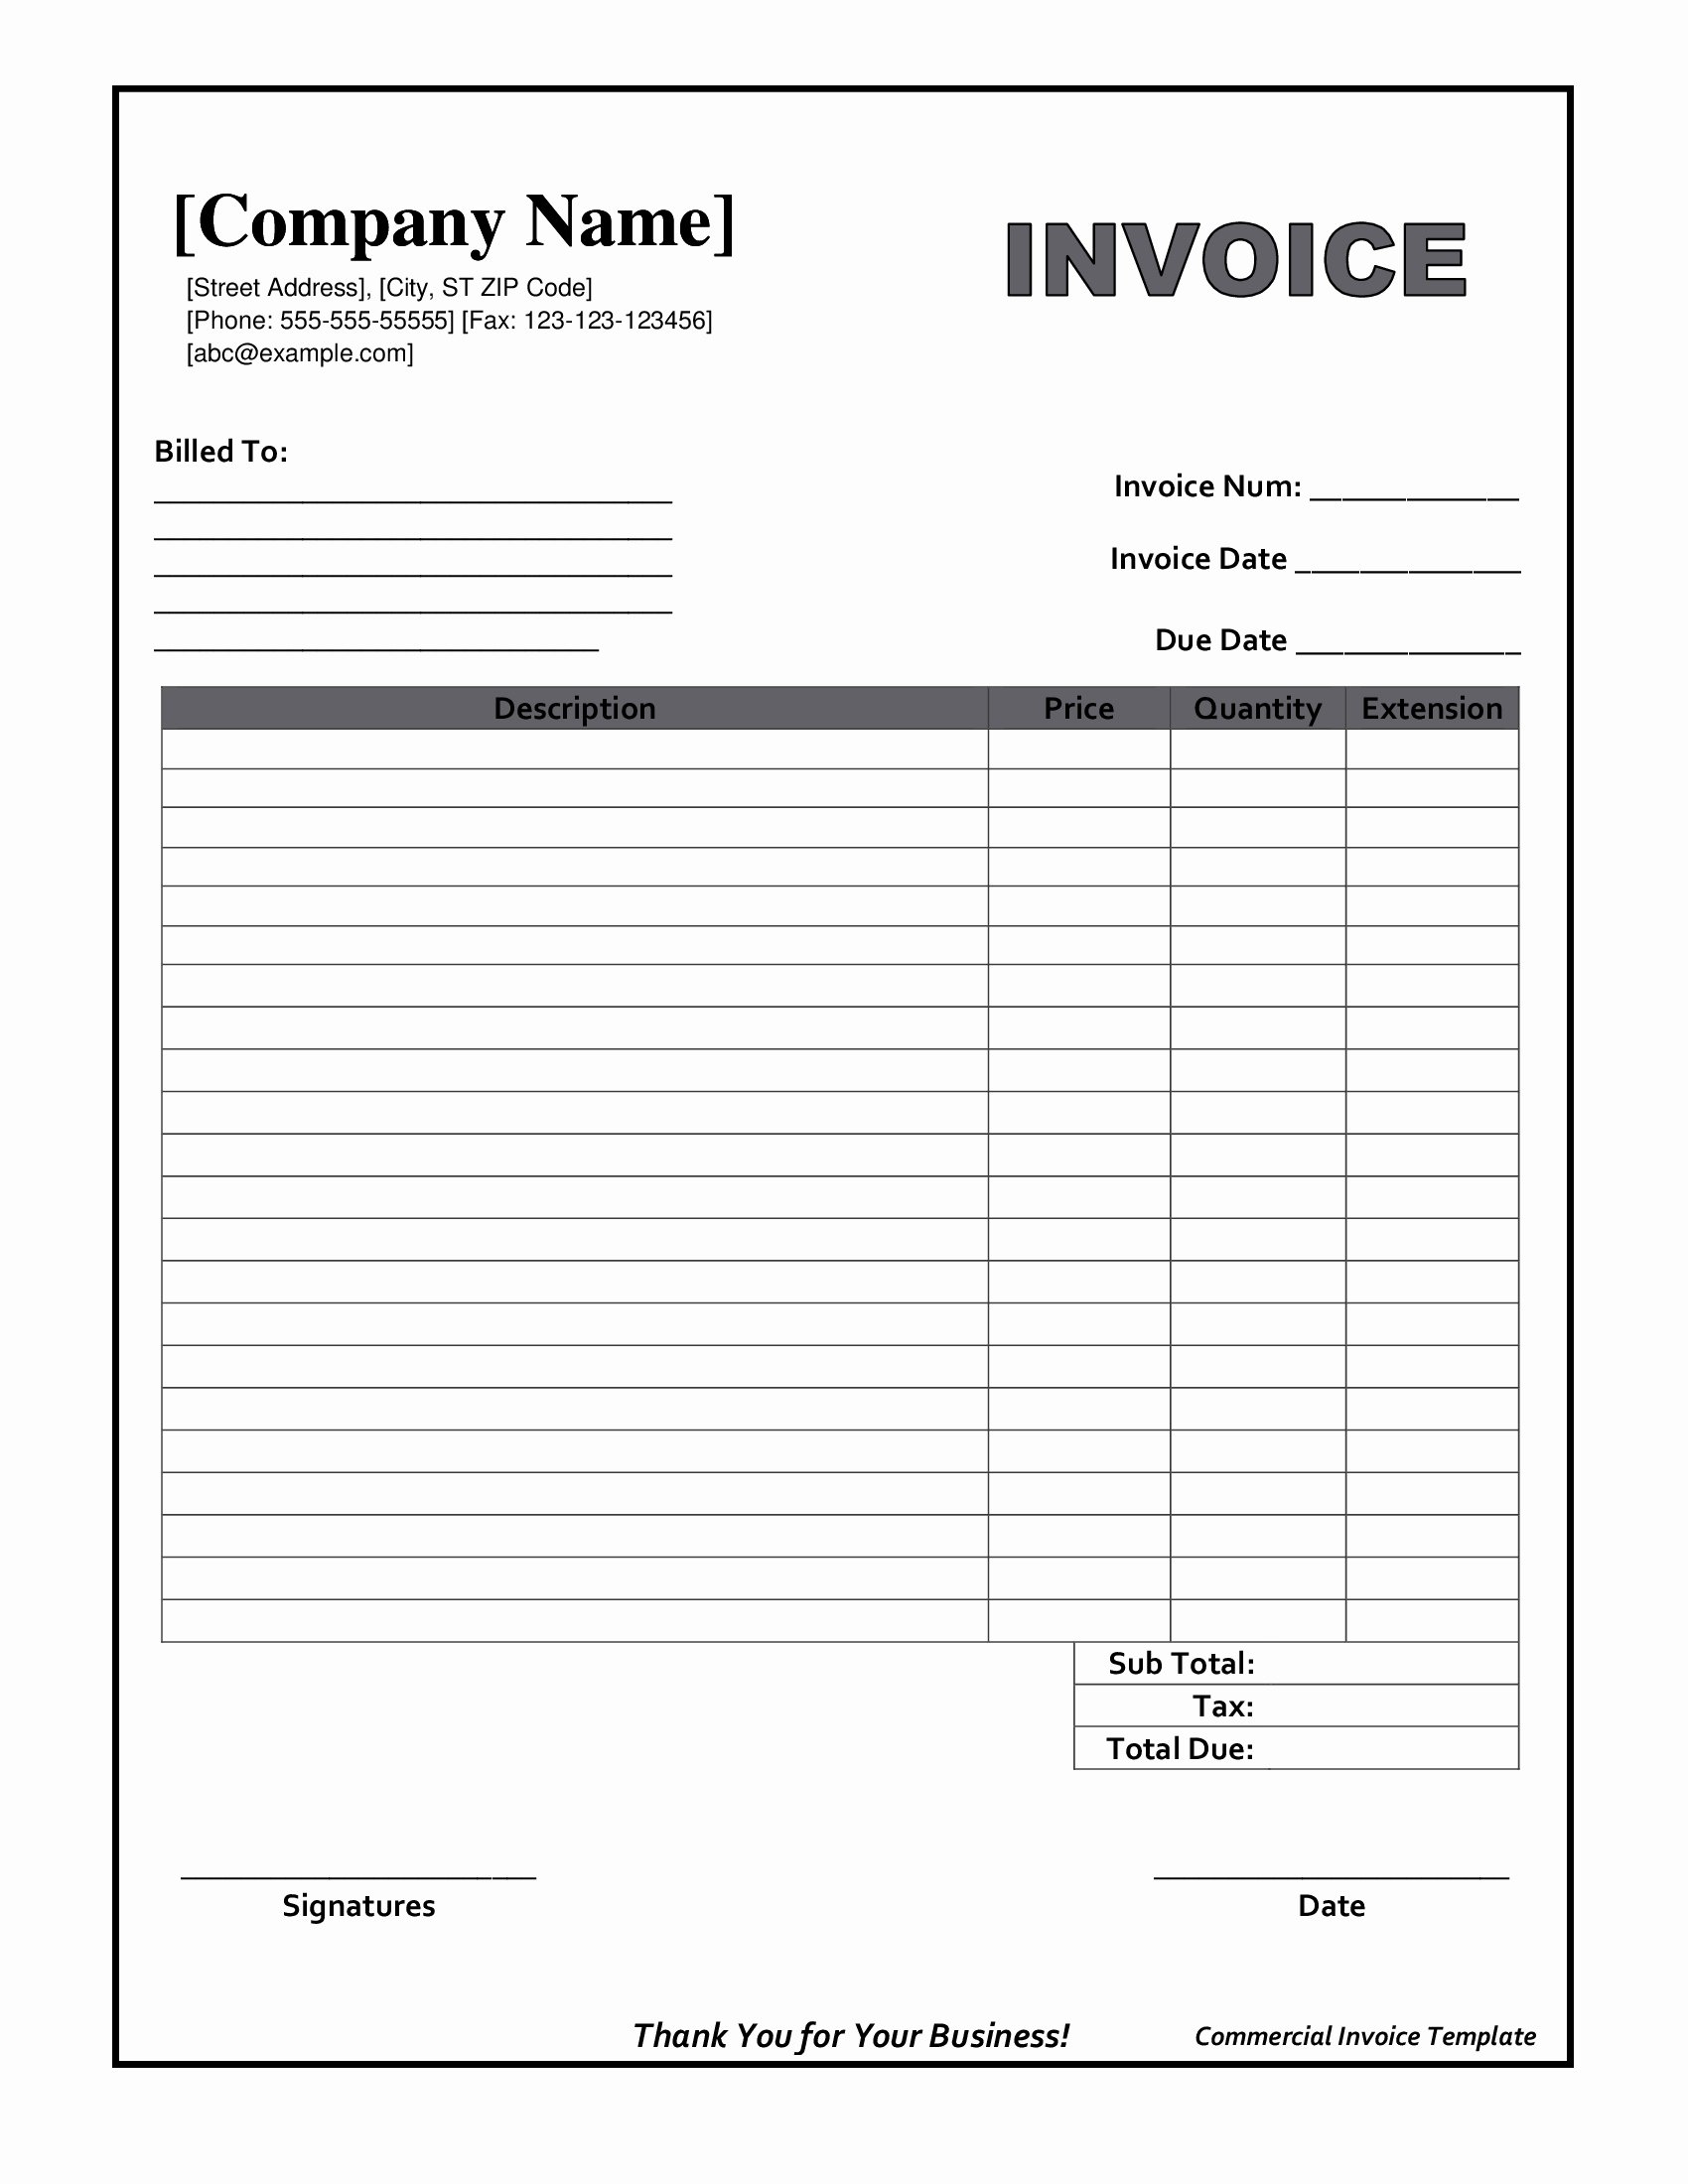 Billing Invoice Template Free Fresh Blank Invoice form Free